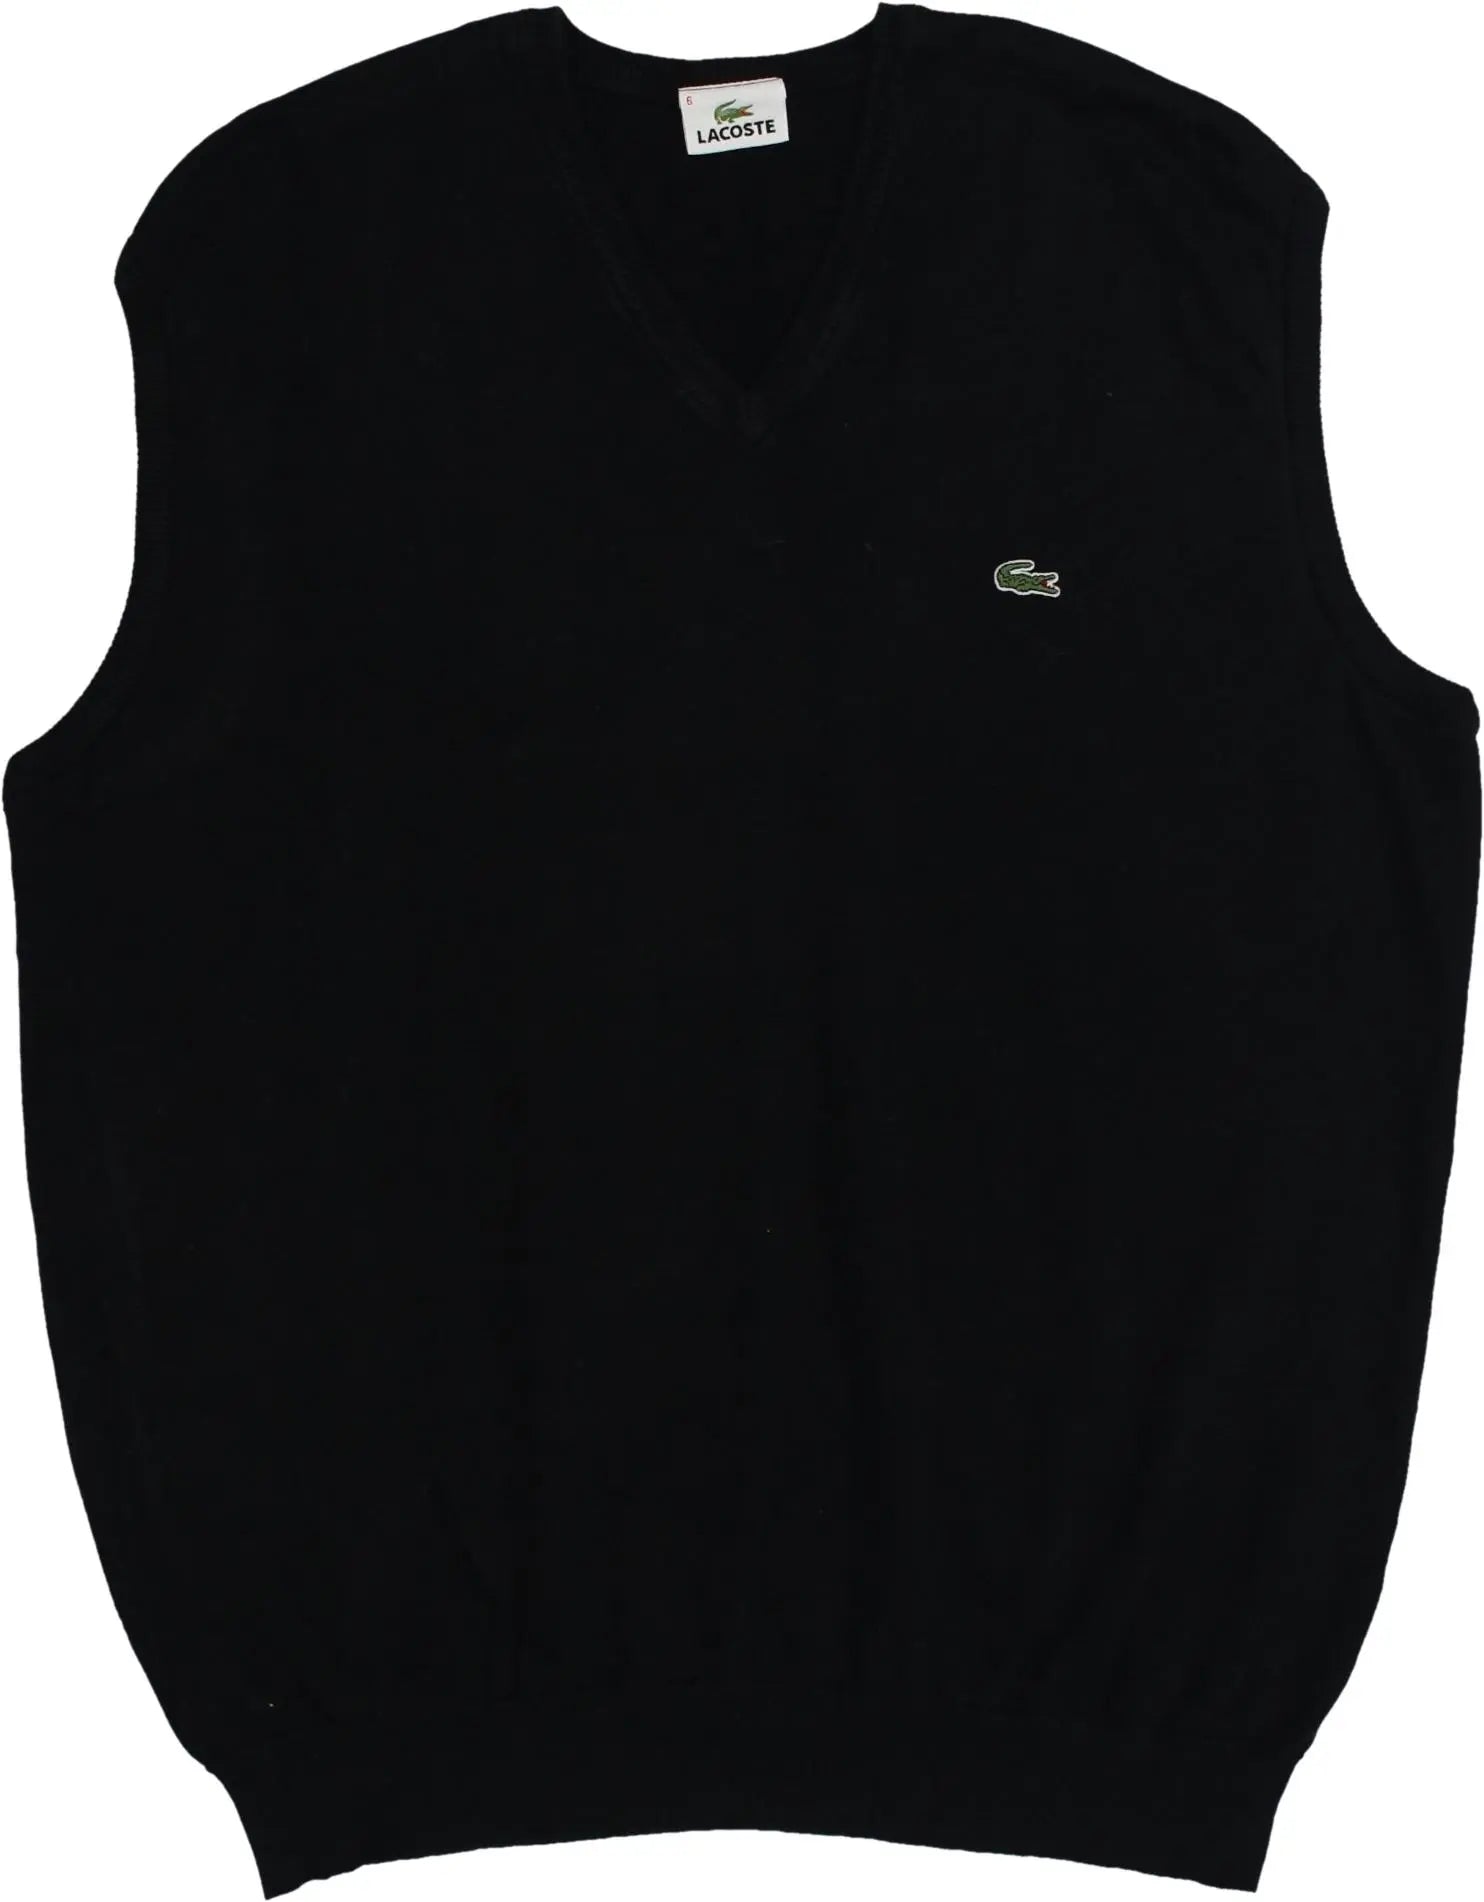 Lacoste - Black Sleeveless Vest by Lacoste- ThriftTale.com - Vintage and second handclothing